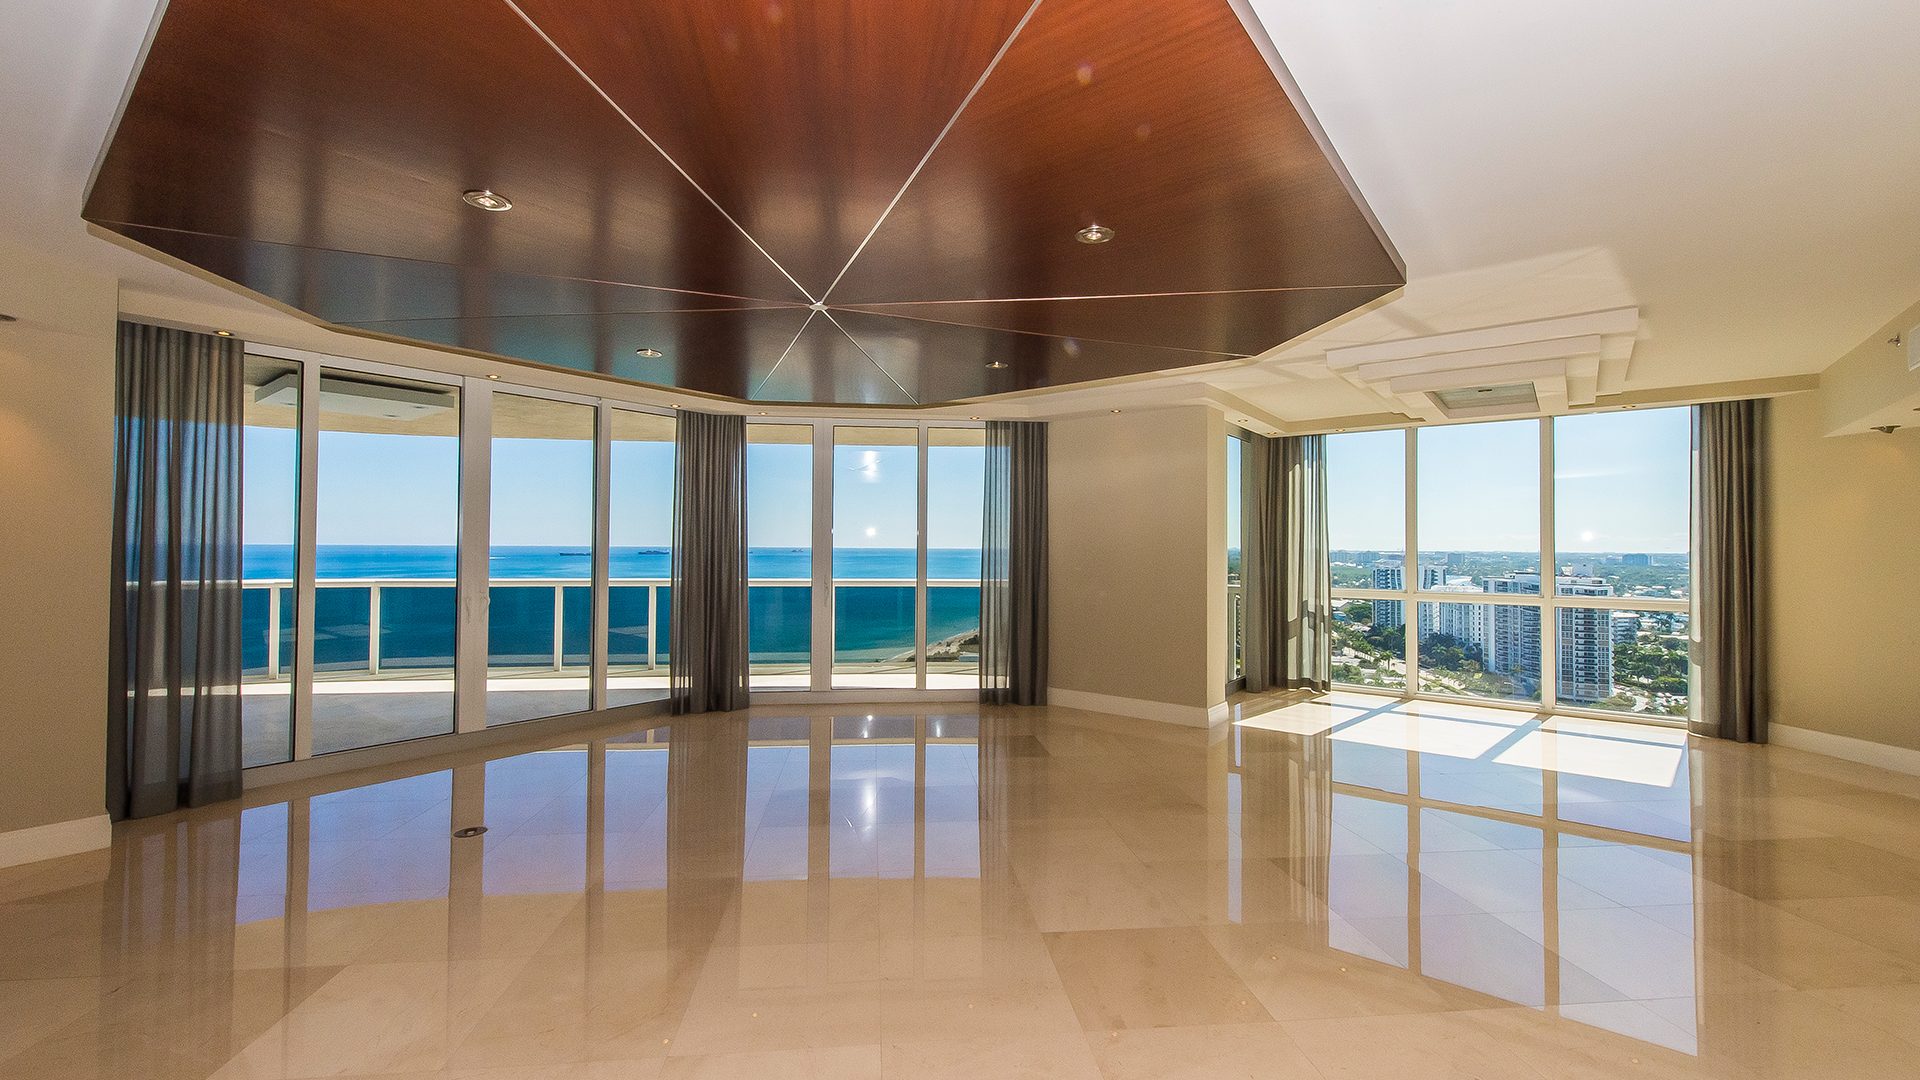 Residence 2310 For Sale at L'Hermitage, Fort Lauderdale Florida 33308